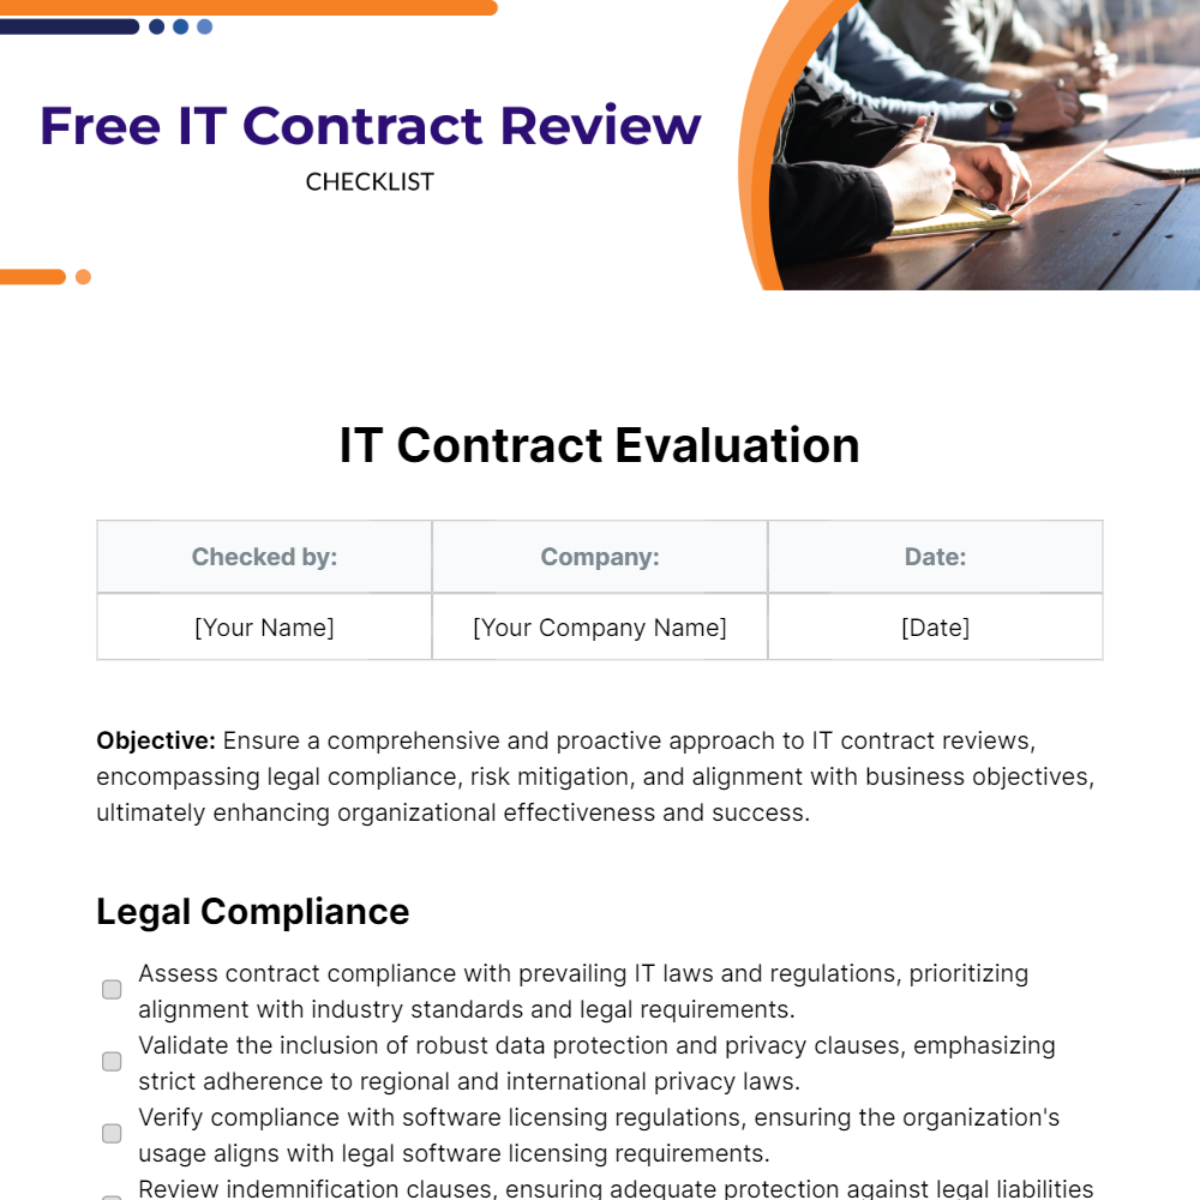 Free IT Contract Review Checklist Template